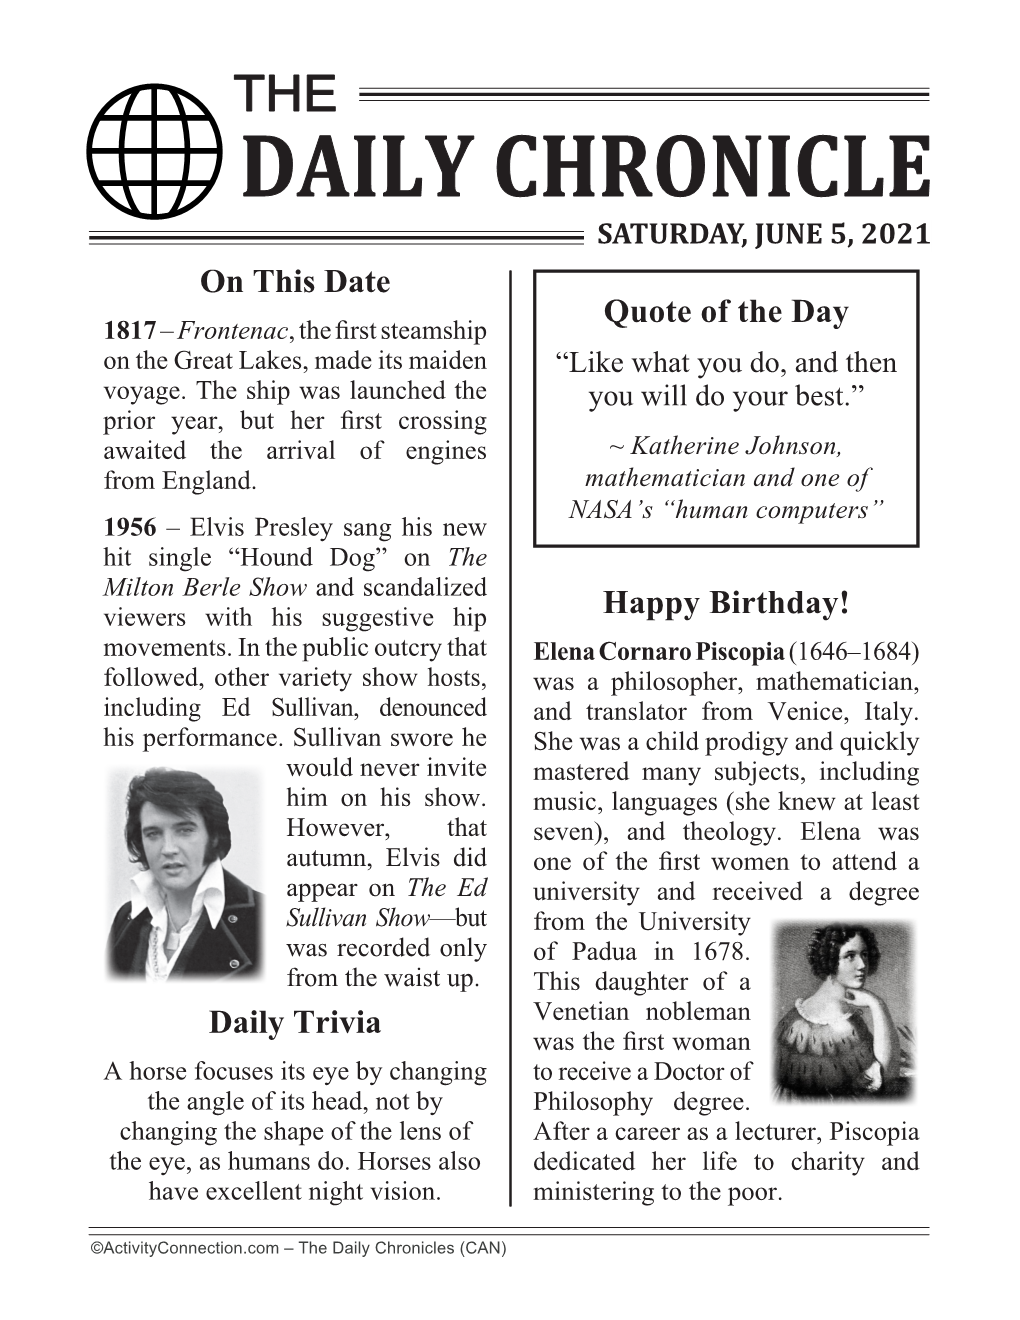 On This Date Daily Trivia Happy Birthday!